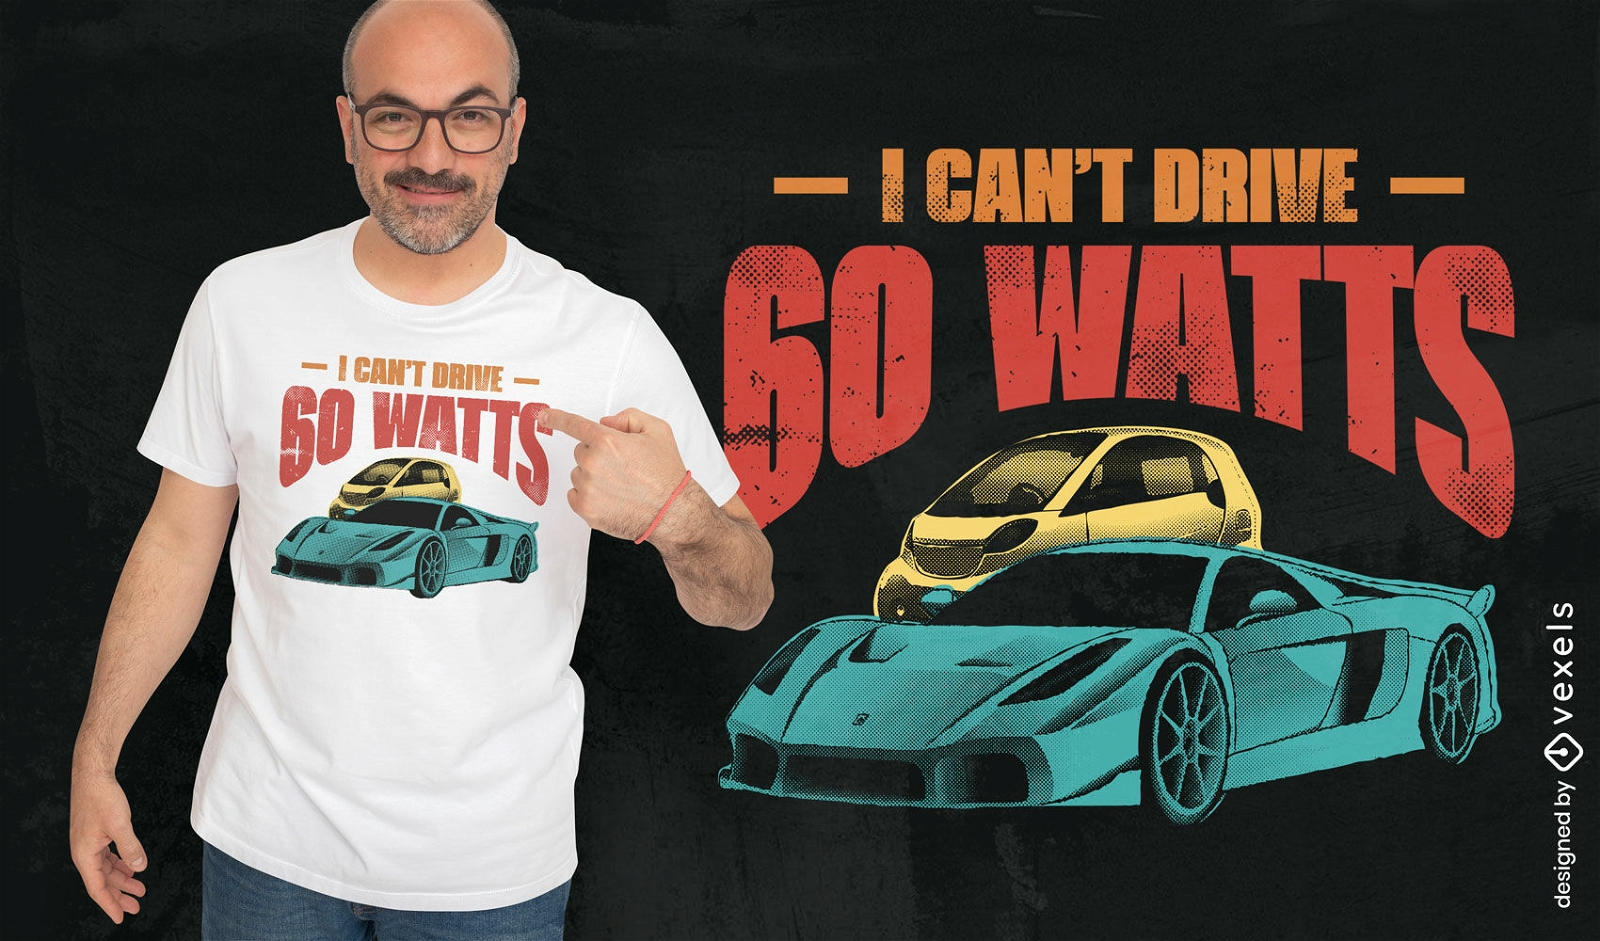 Can't drive electric cars t-shirt design